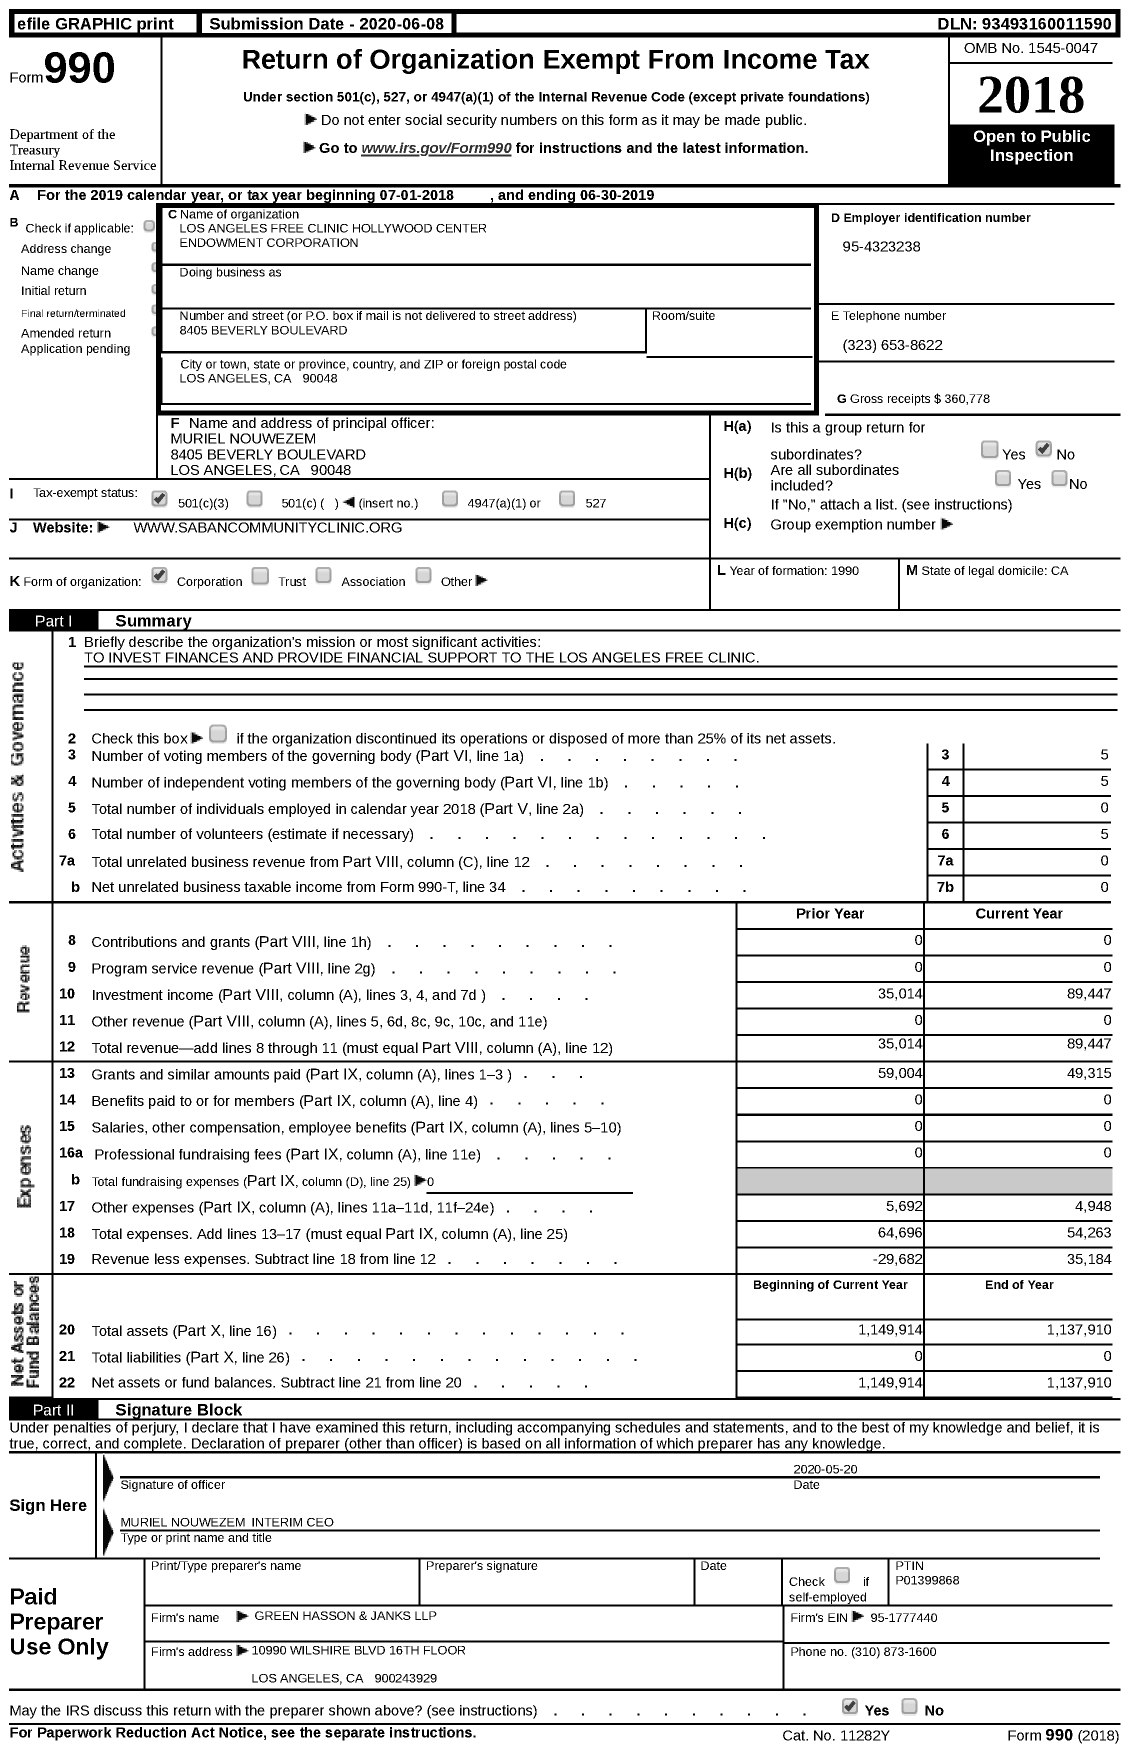 Image of first page of 2018 Form 990 for Los Angeles Free Clinic Hollywood Center Endowment Corporation